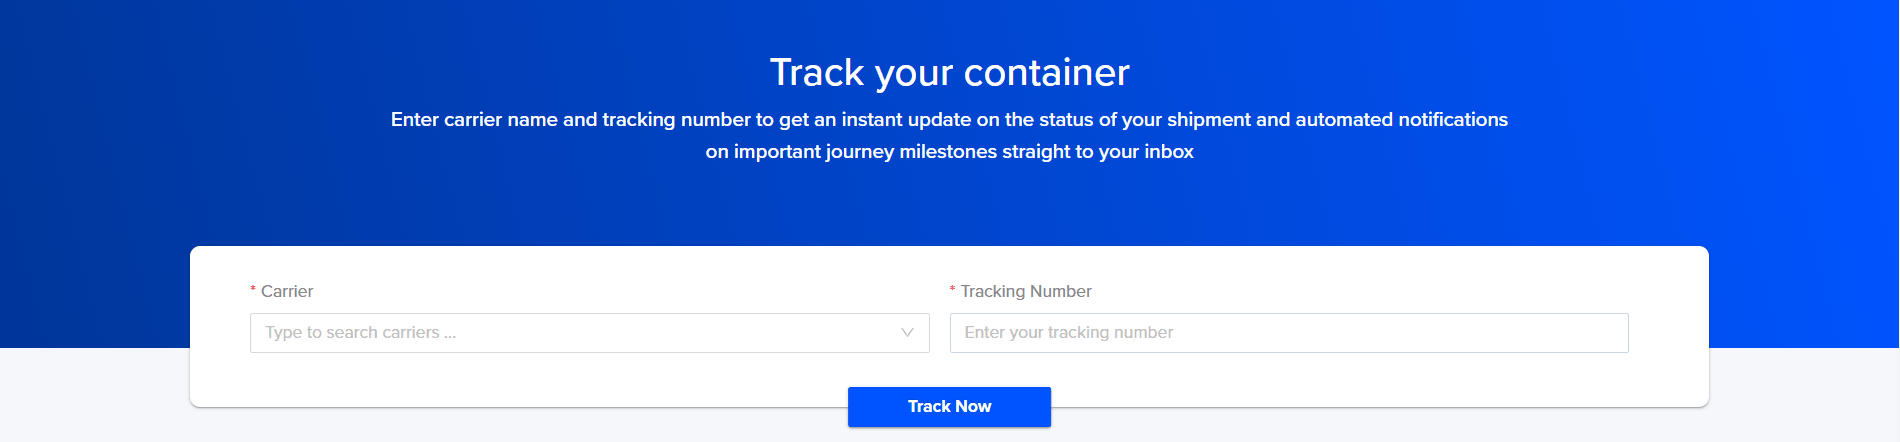 Search Container & Ocean Freight Tracking System